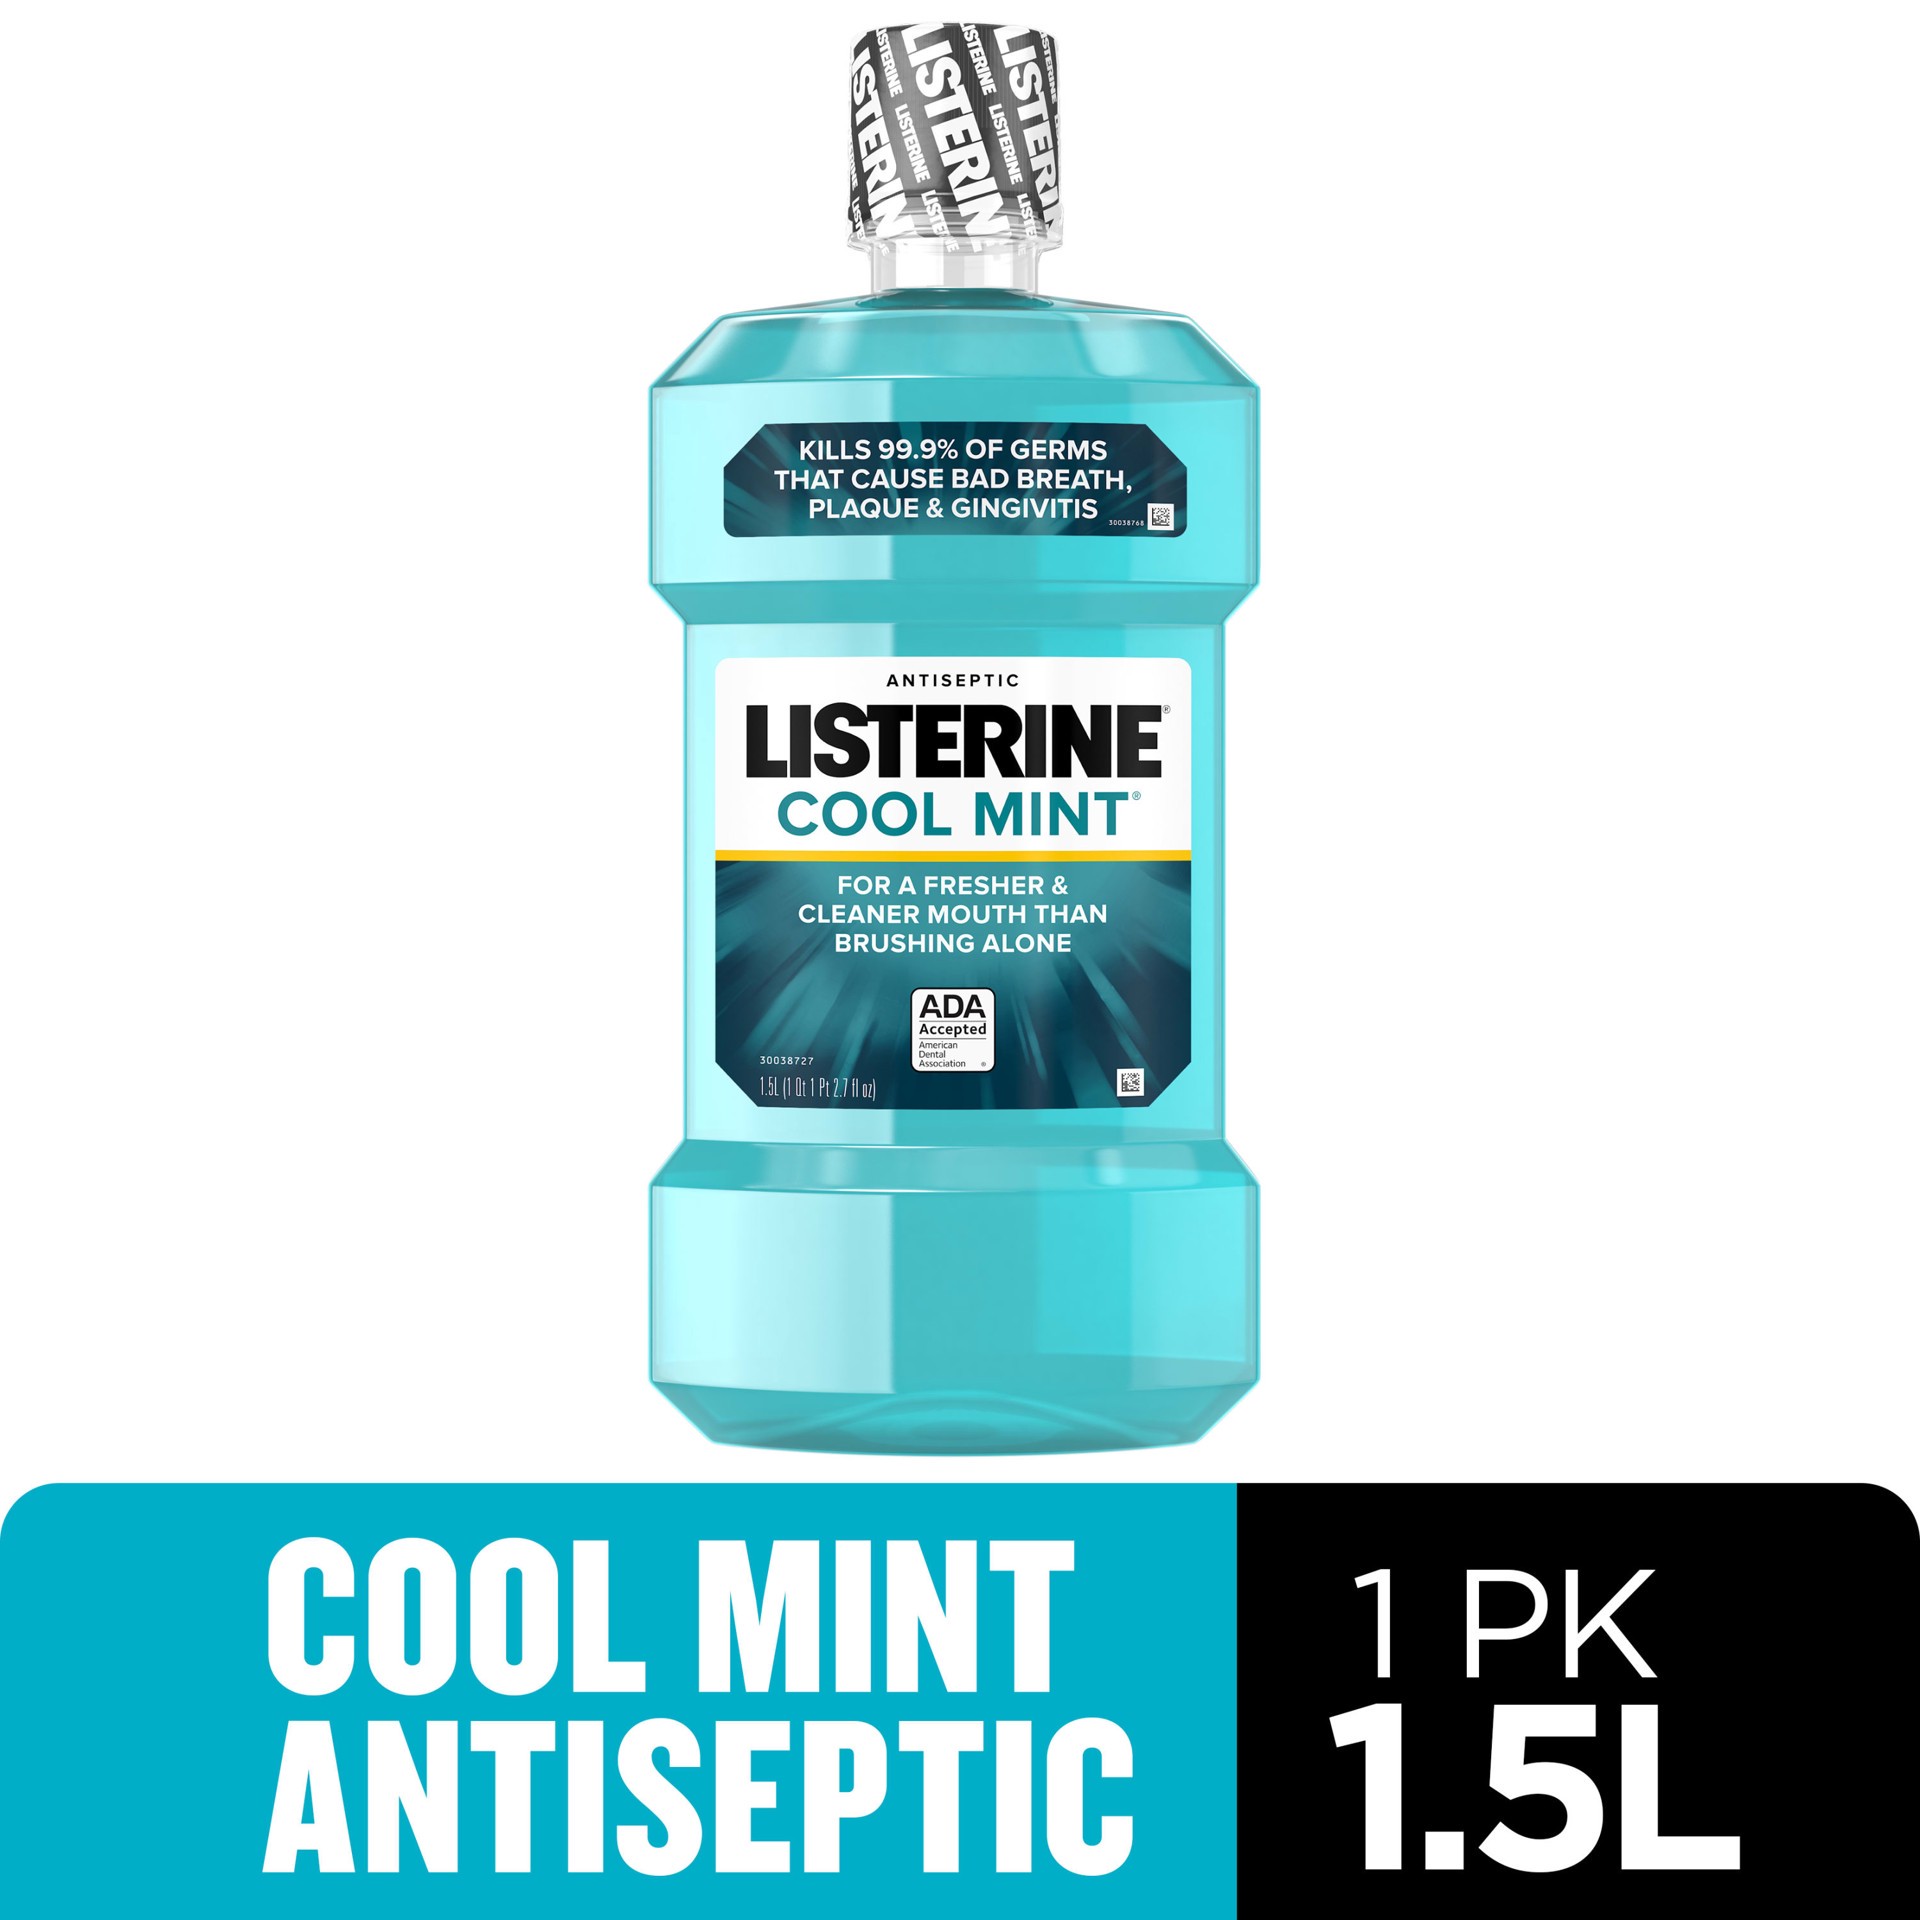 slide 1 of 6, Listerine Cool Mint Antiseptic Mouthwash, Daily Oral Rinse Kills 99% of Germs that Cause Bad Breath, Plaque and Gingivitis for a Fresher, Cleaner Mouth, Cool Mint Flavor, 1.5 L, 1.5 liter